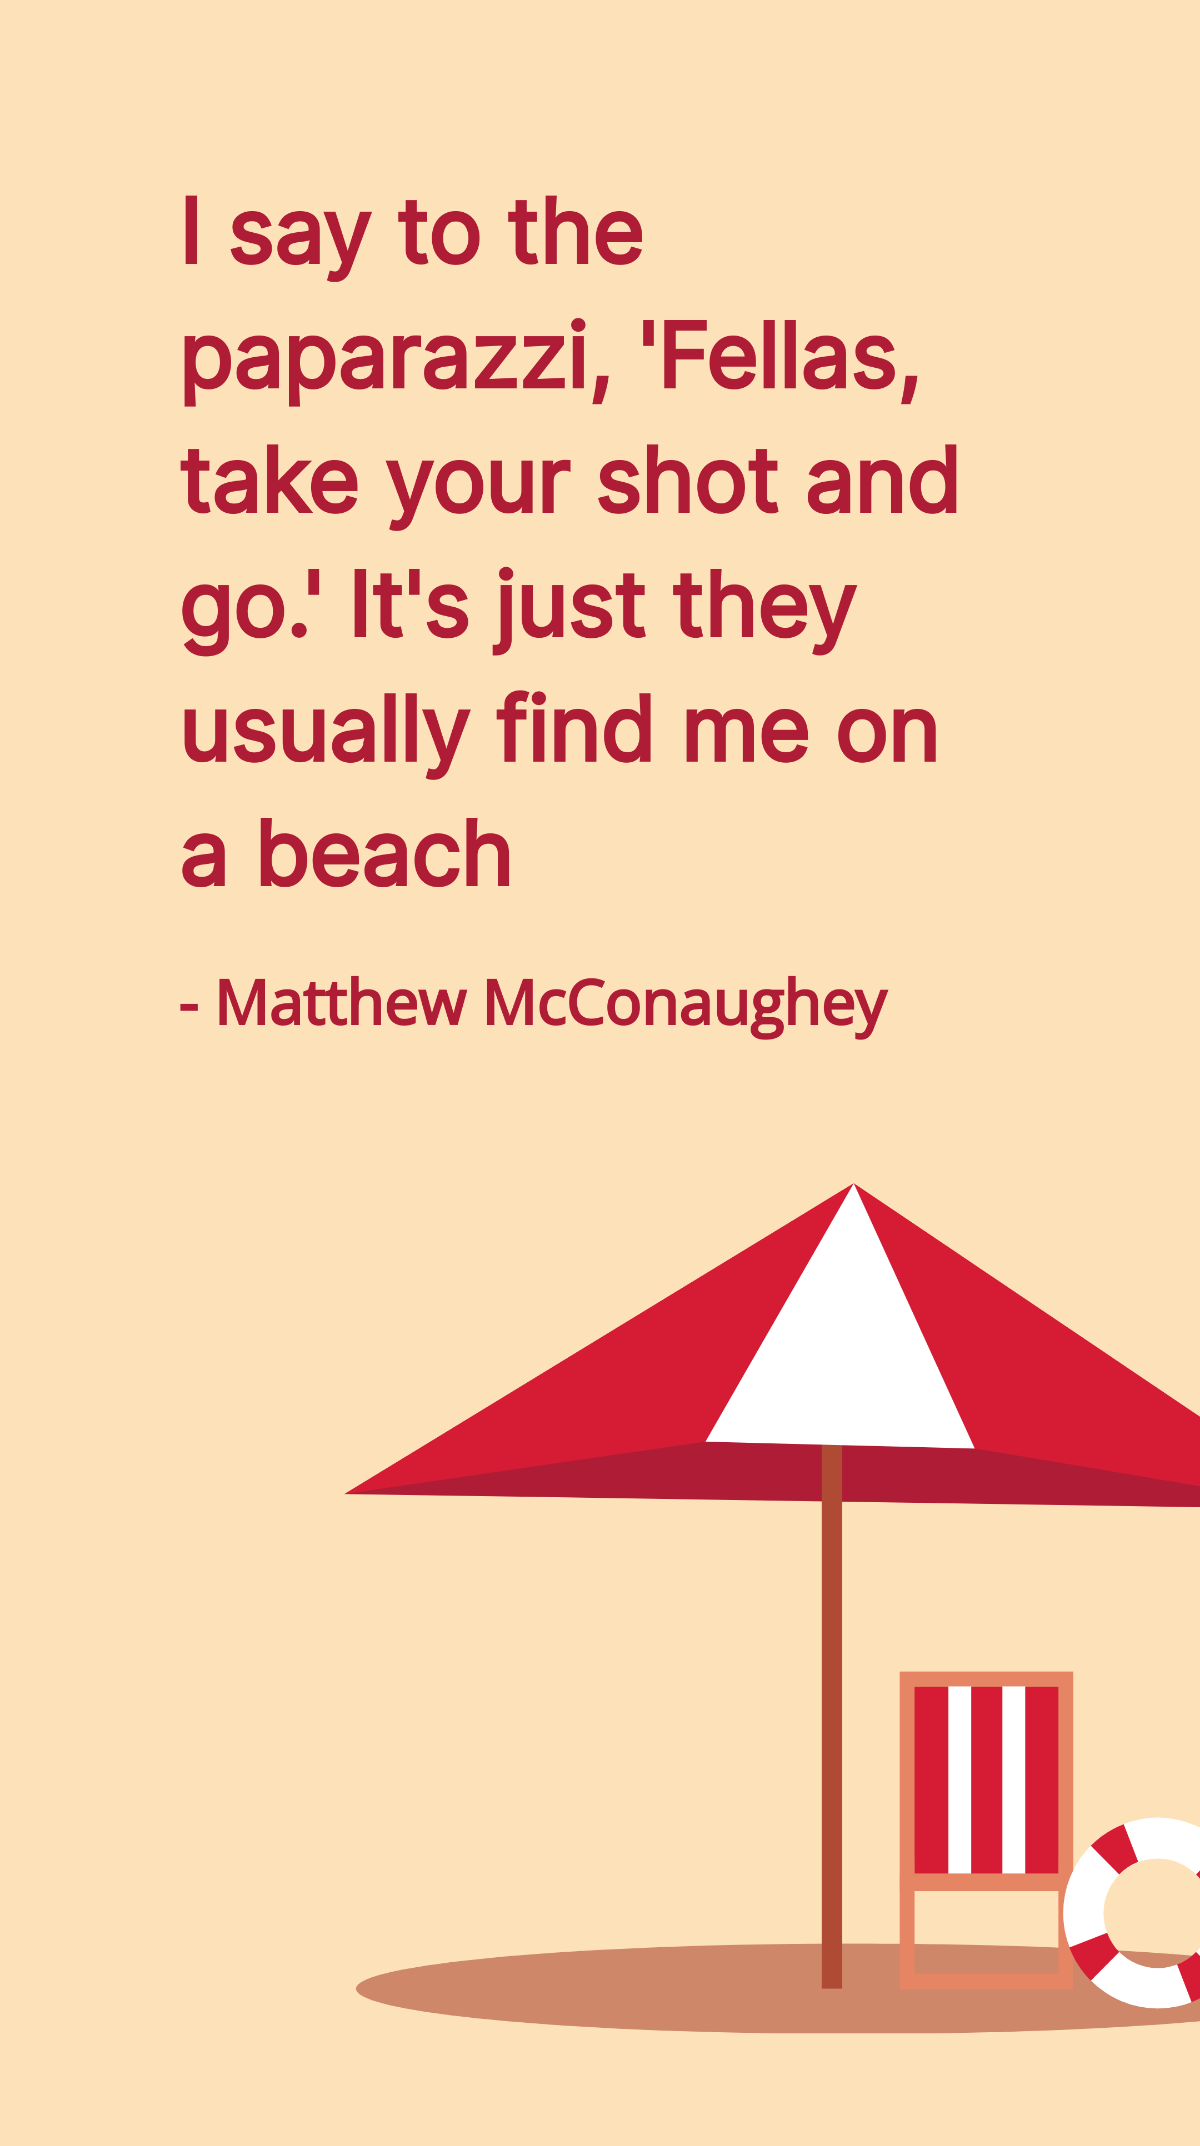 Matthew McConaughey - I say to the paparazzi, 'Fellas, take your shot and go.' It's just they usually find me on a beach Template